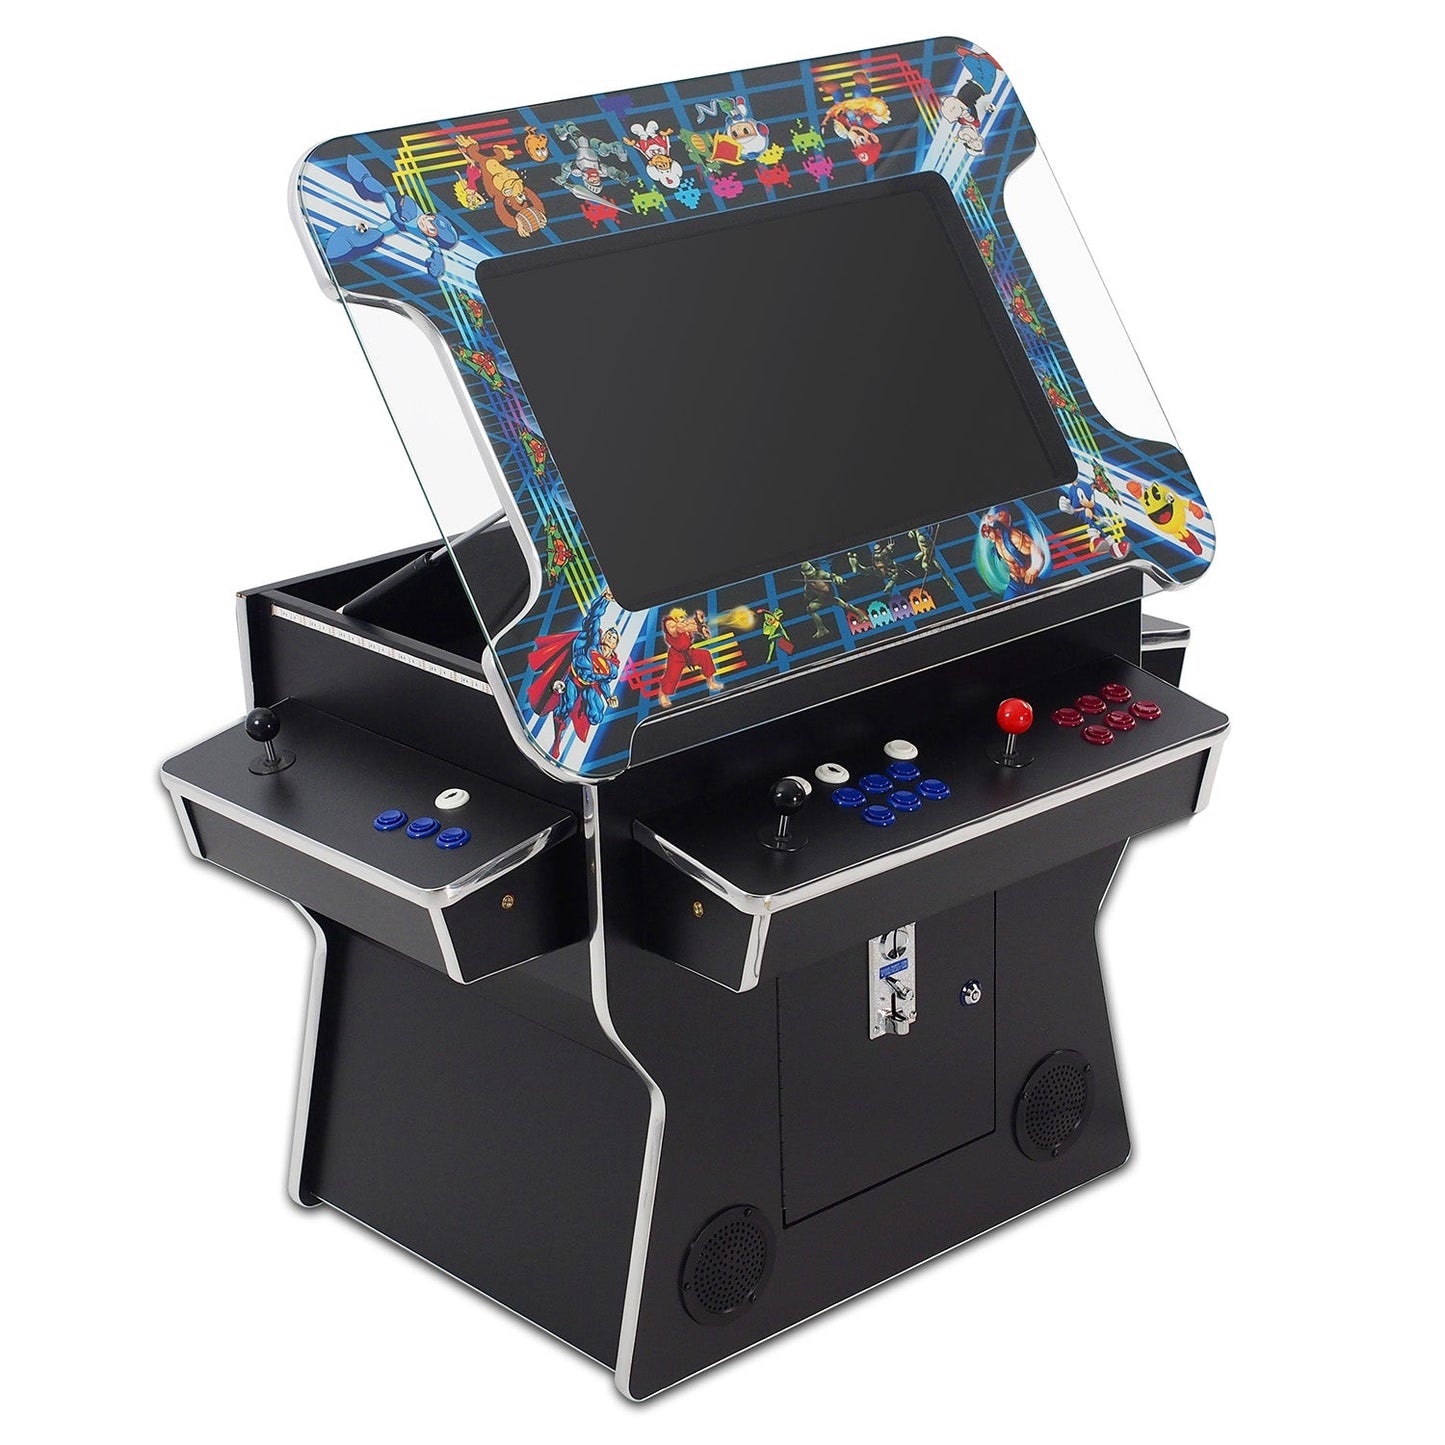 Tilt Cocktail Arcade Machine With 3500 Games Video Game Arcade Cabinets 